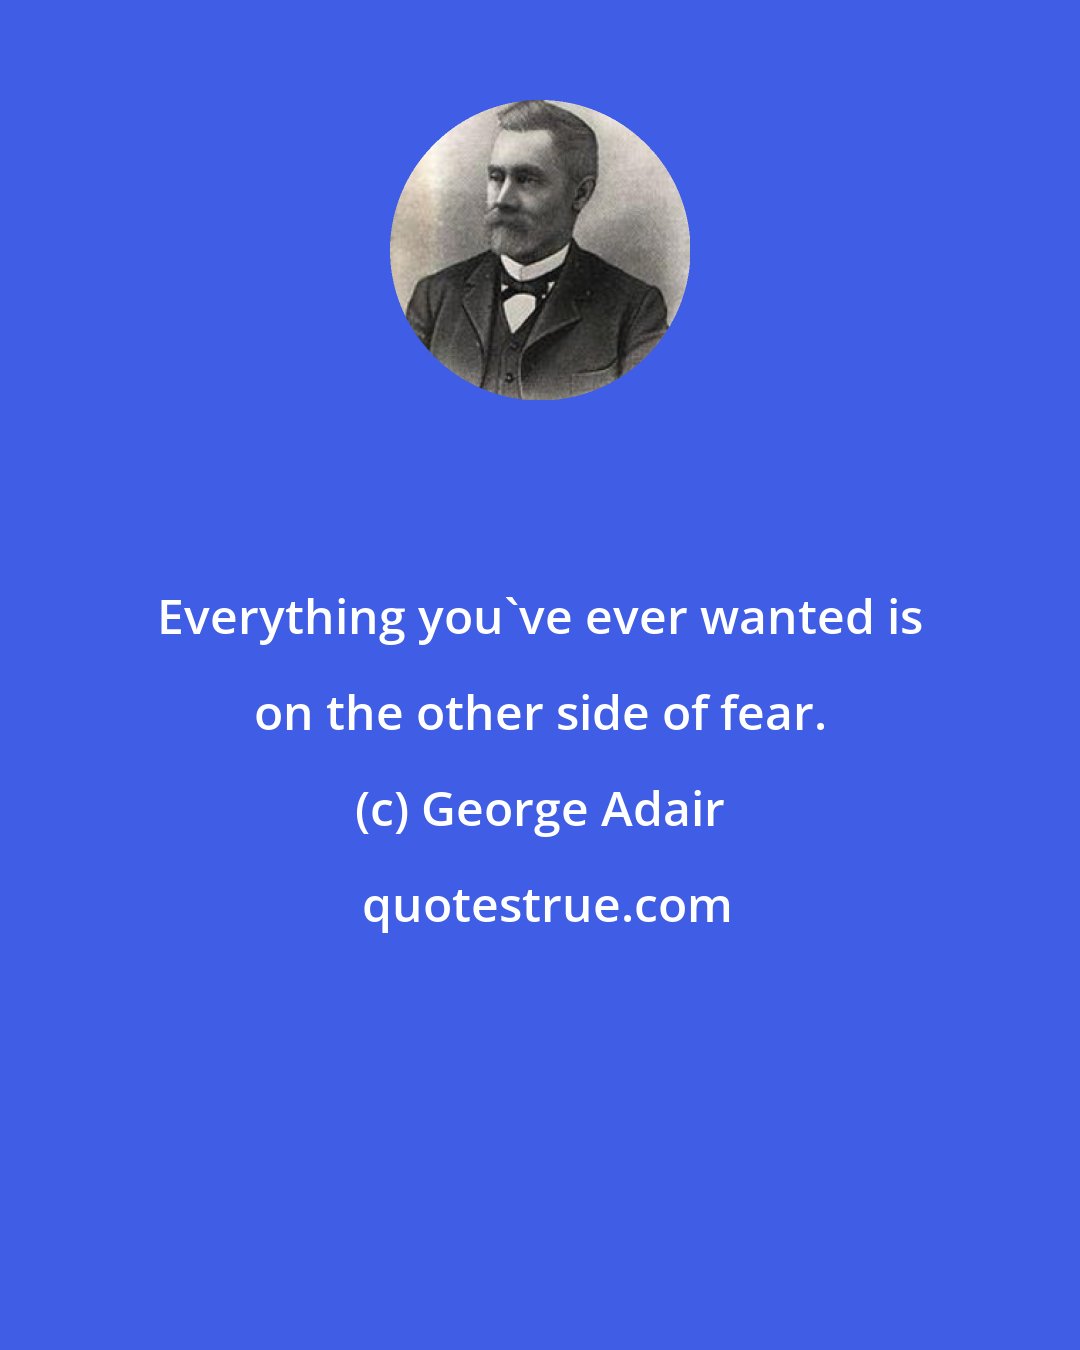 George Adair: Everything you've ever wanted is on the other side of fear.